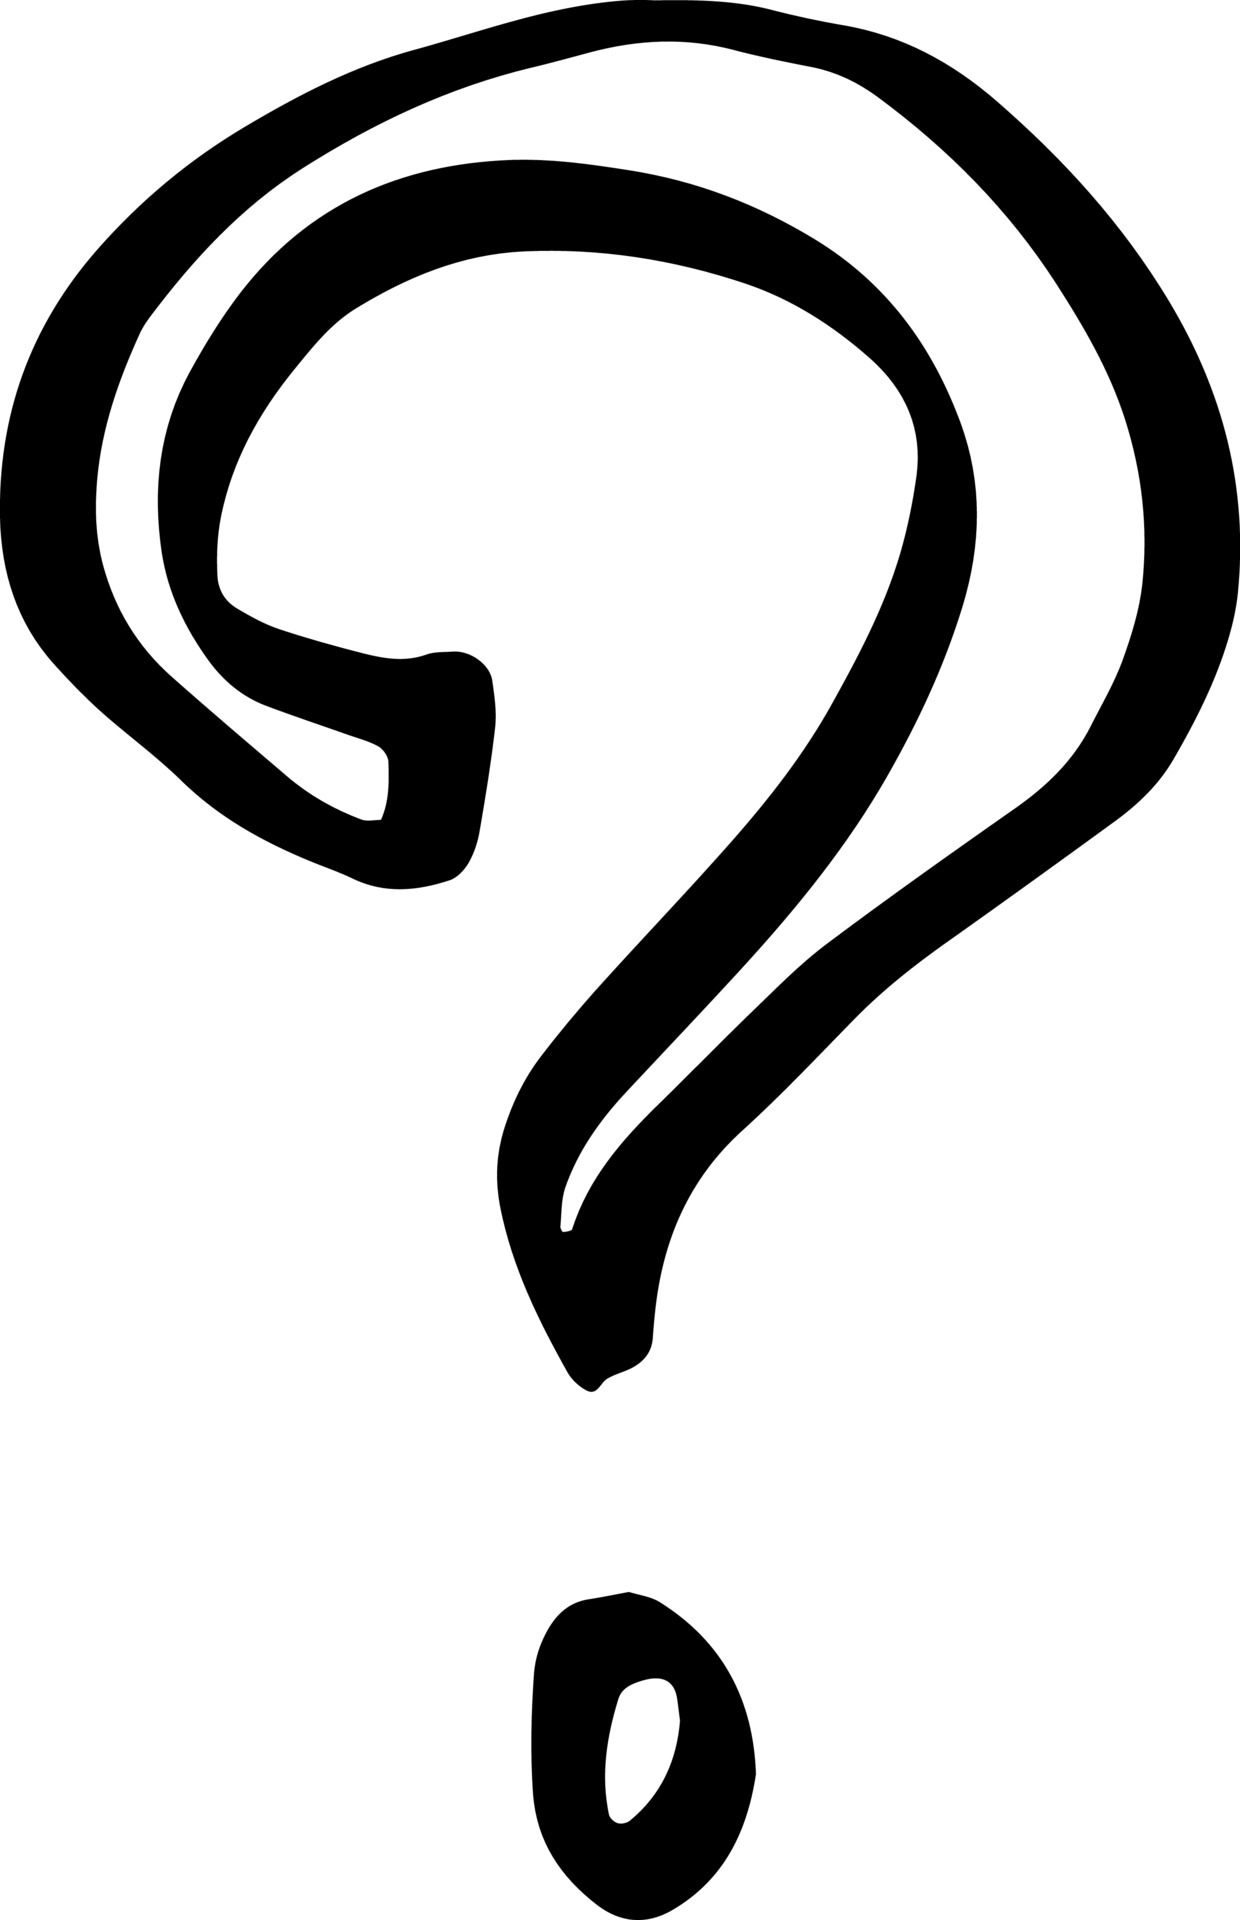 Handmade question mark doodle animation.... | Stock Video | Pond5